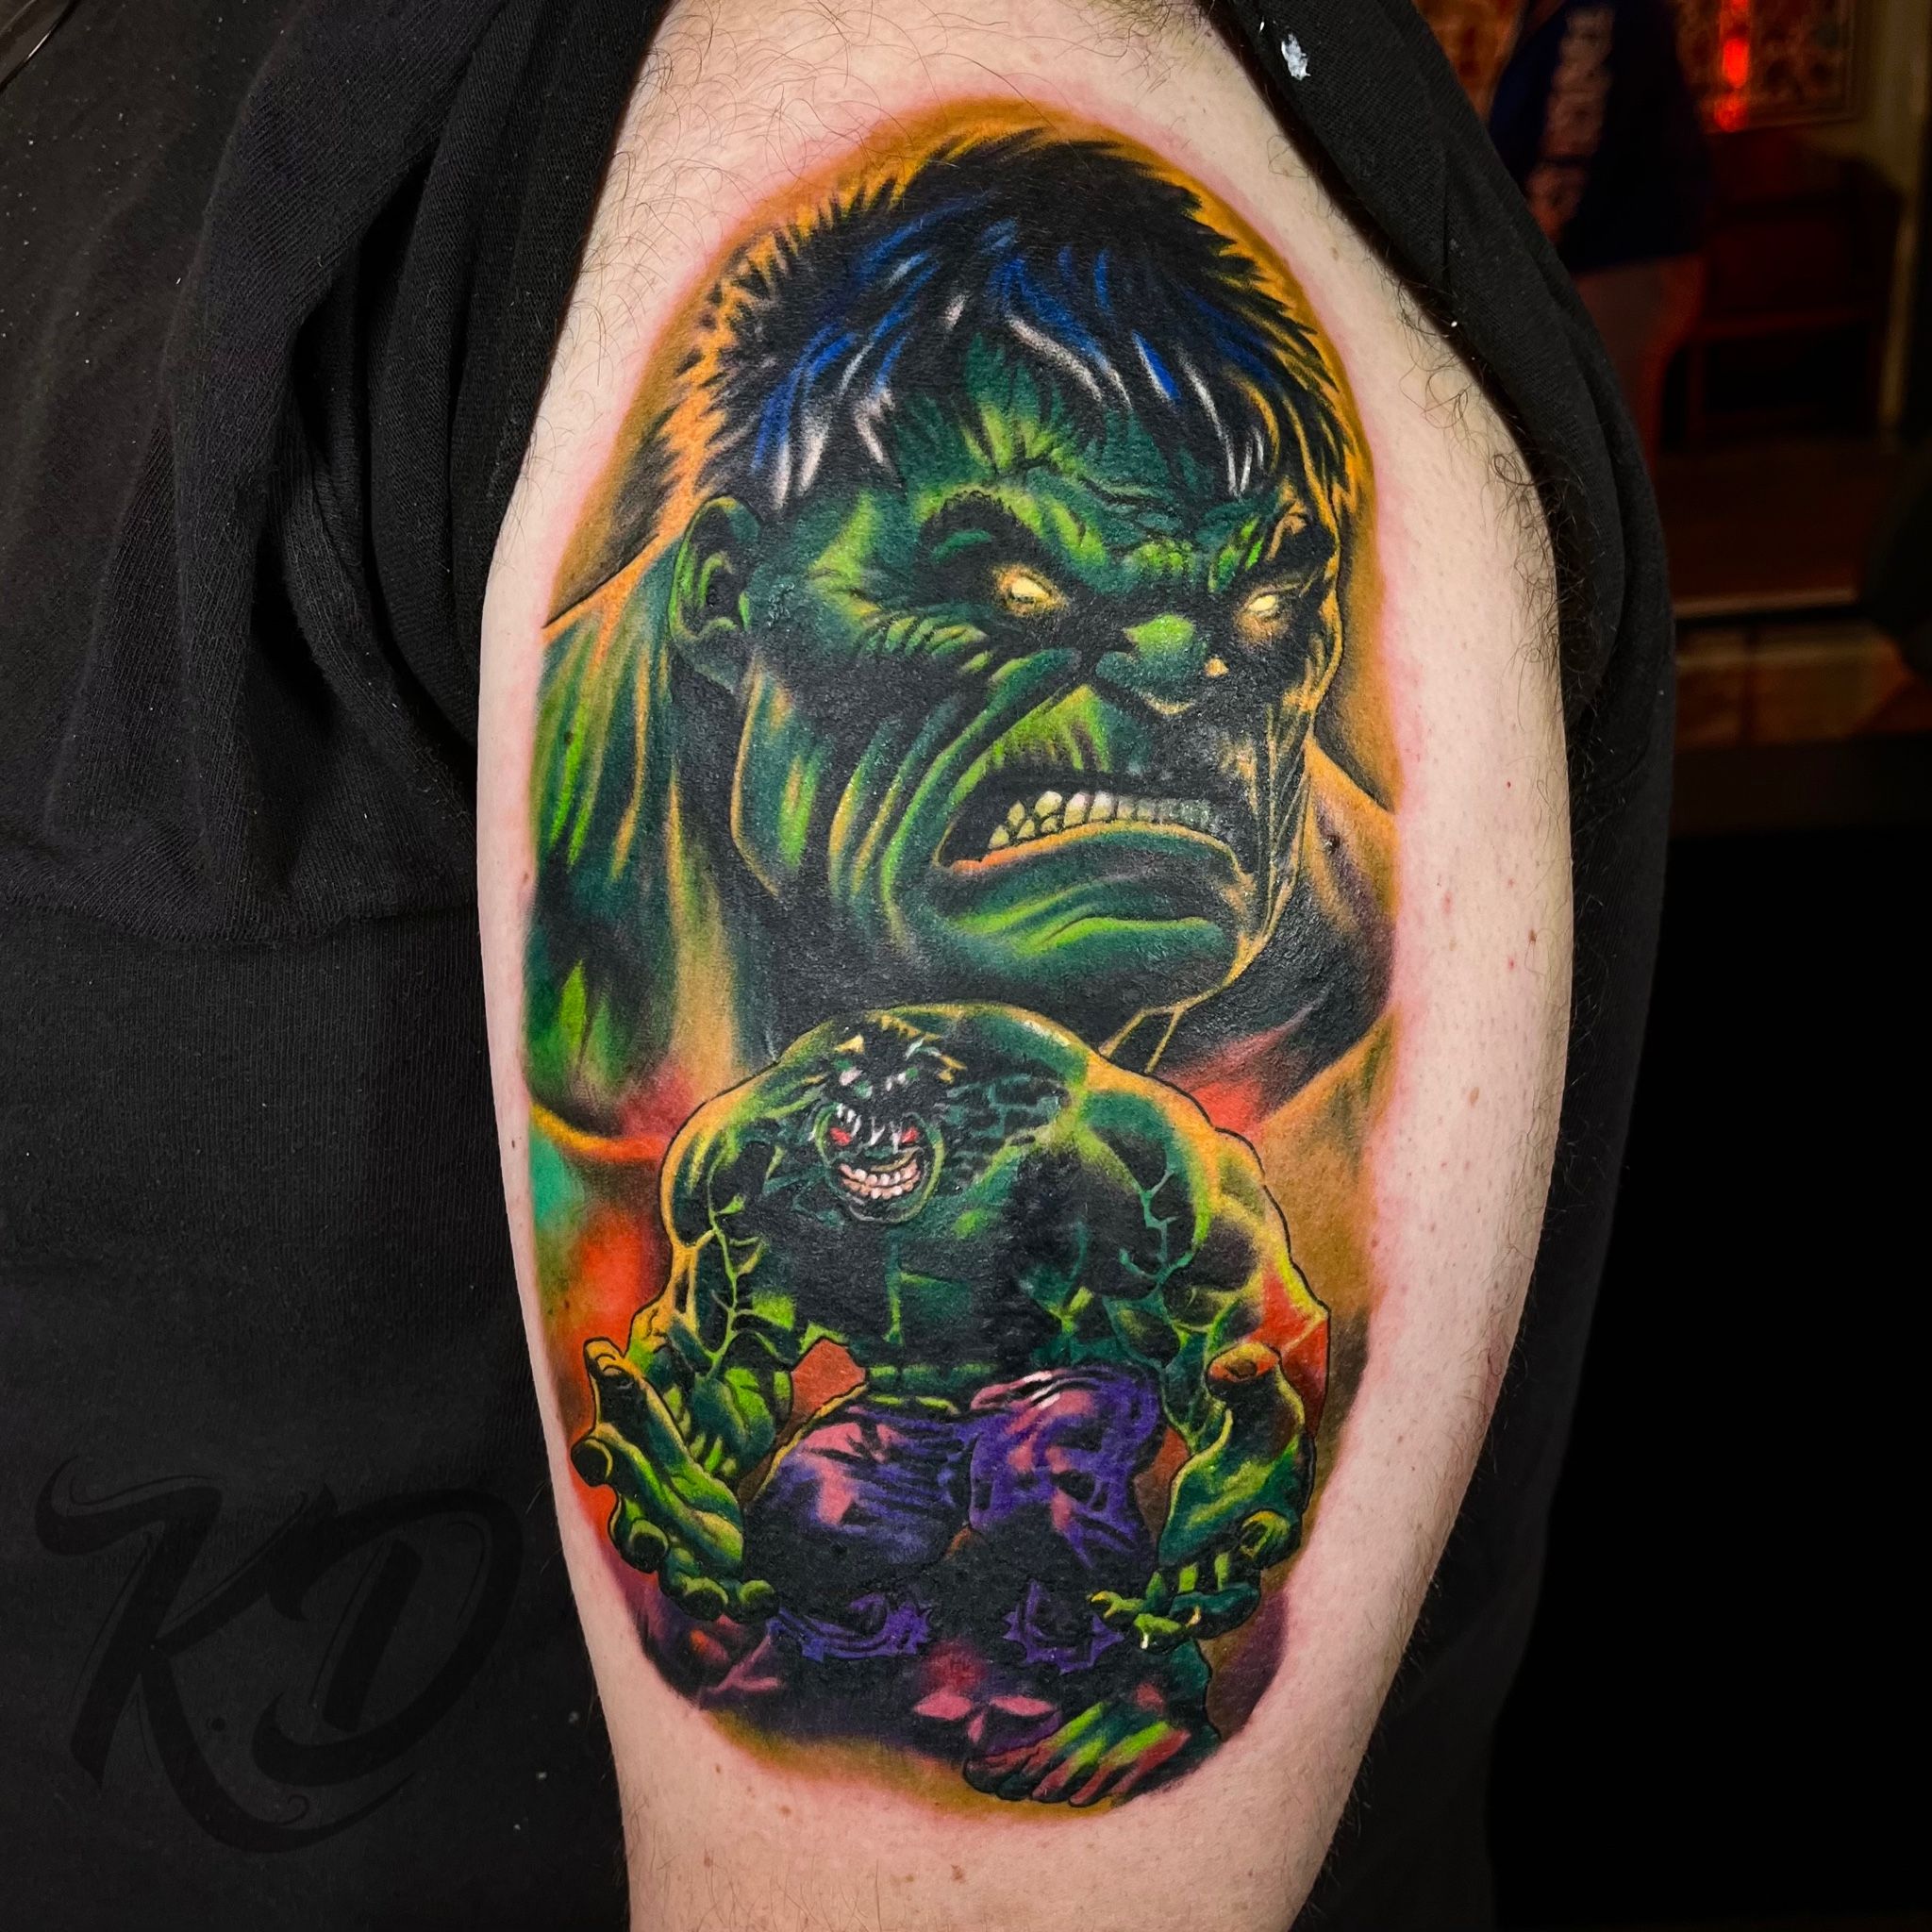 Hulk drawn by me as part of a tattoo design for a friend  rfanart